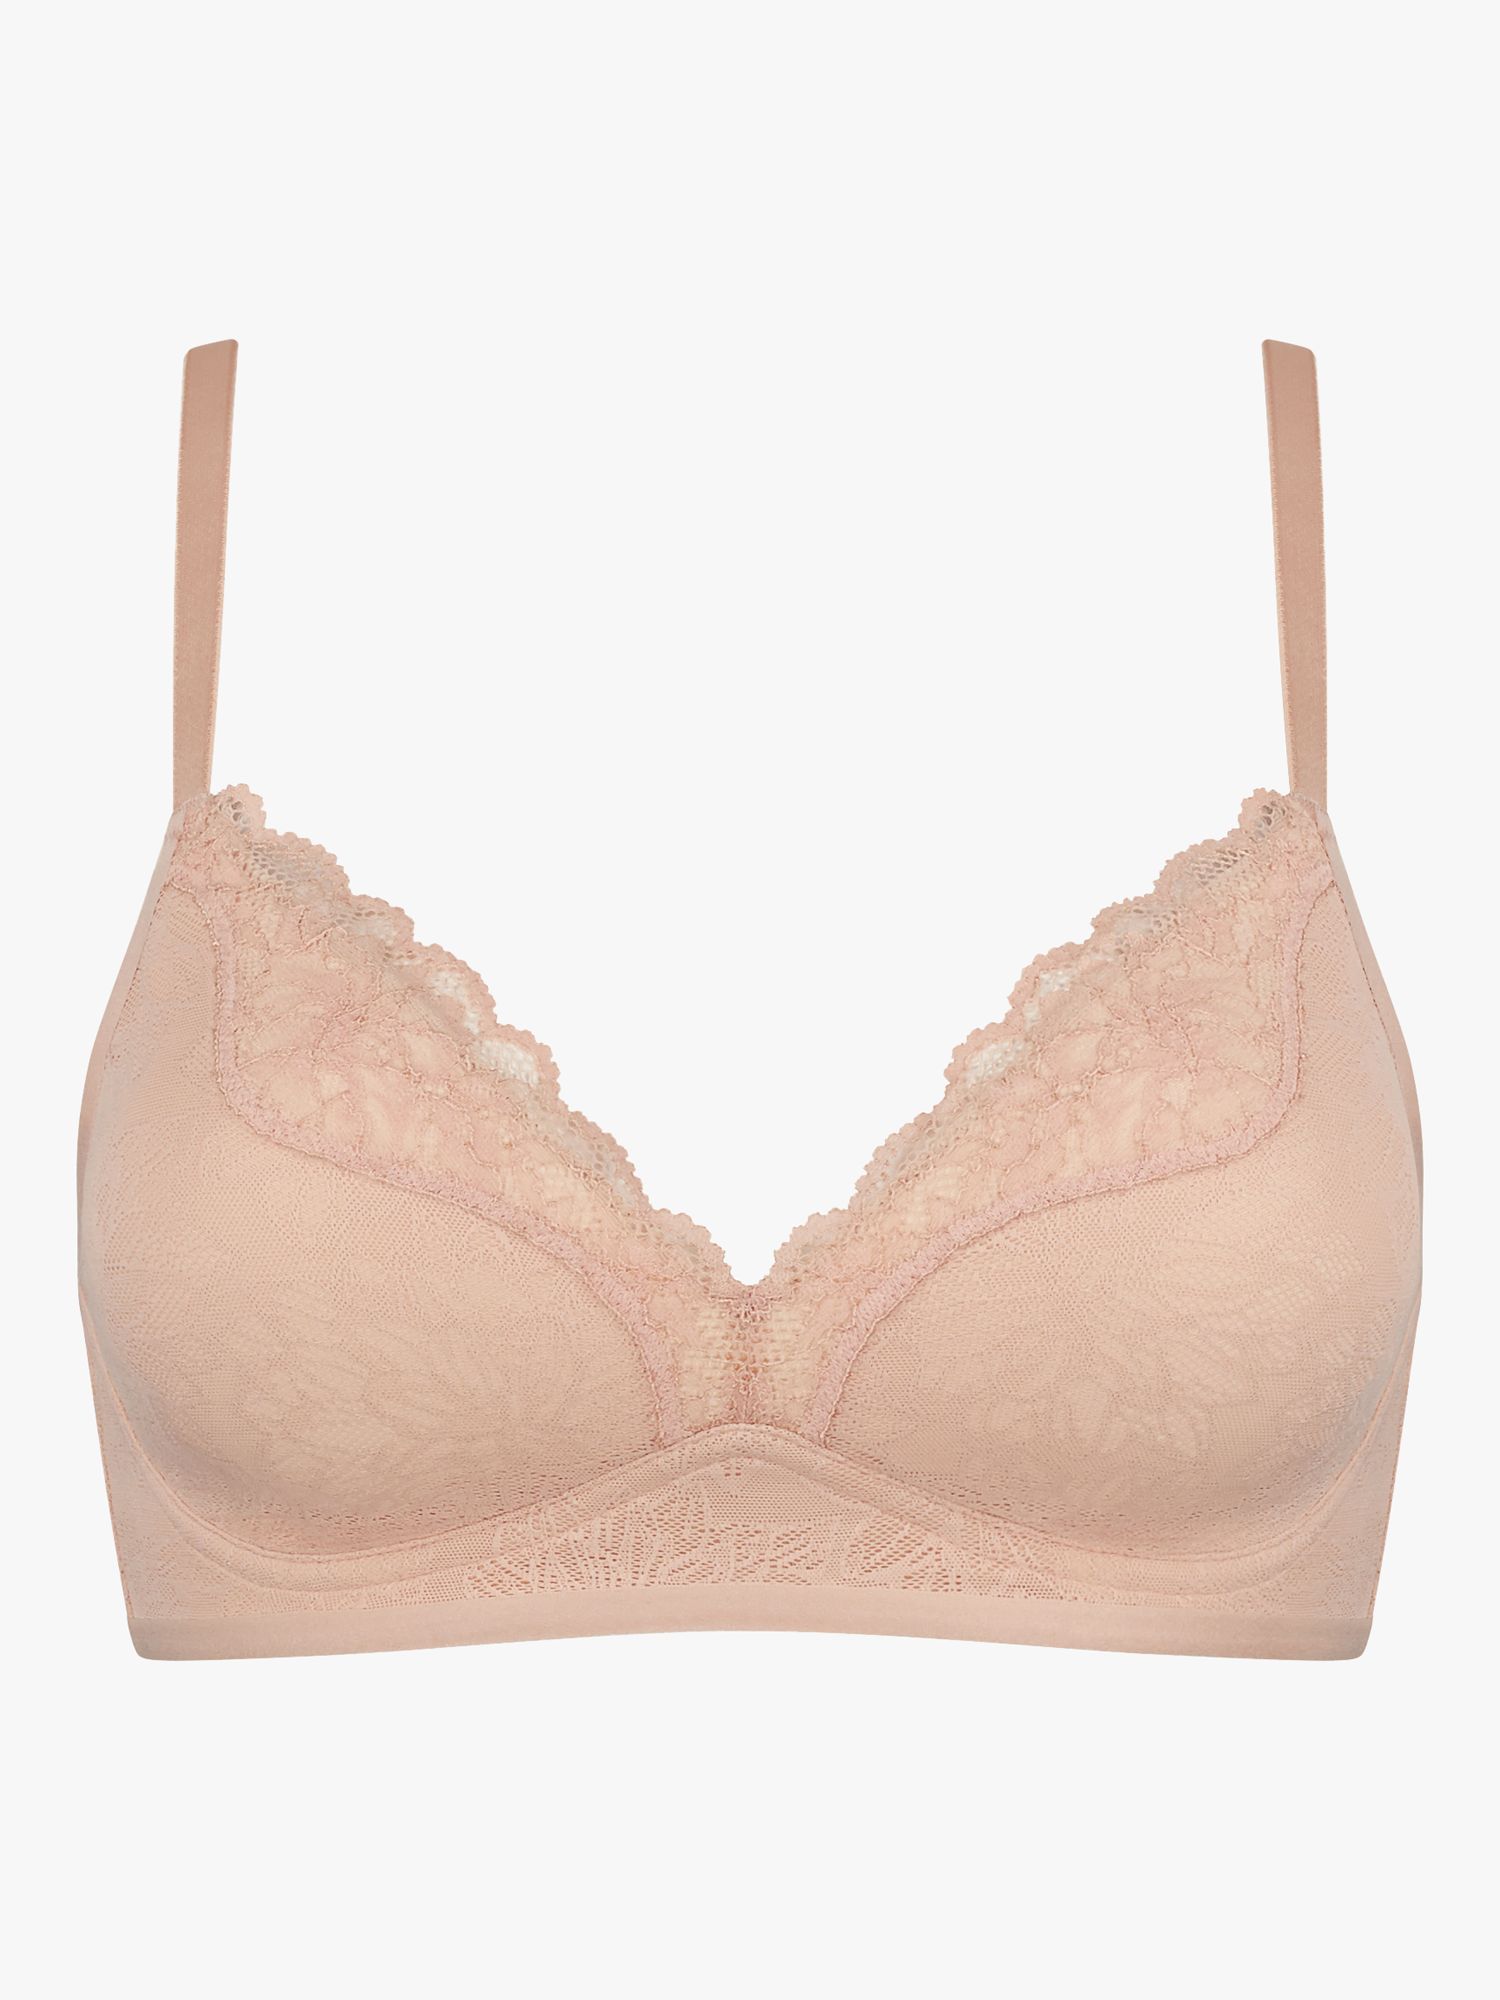 Triumph Fit Smart Non Wired Bra, Light Brown at John Lewis & Partners